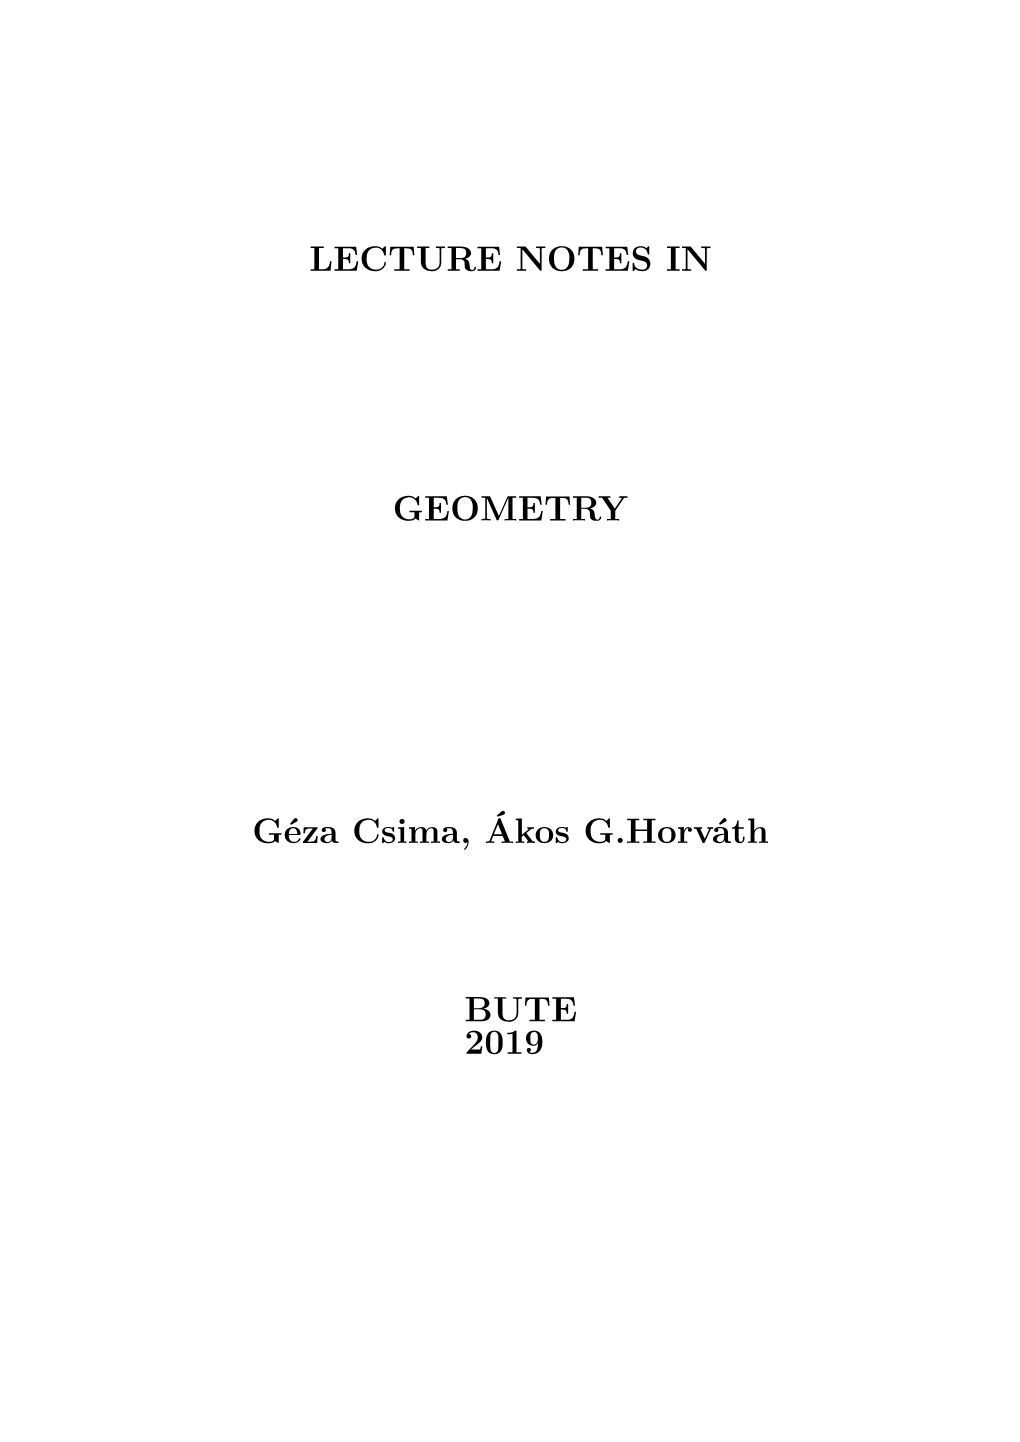 LECTURE NOTES in GEOMETRY Géza Csima, Ákos G.Horváth BUTE